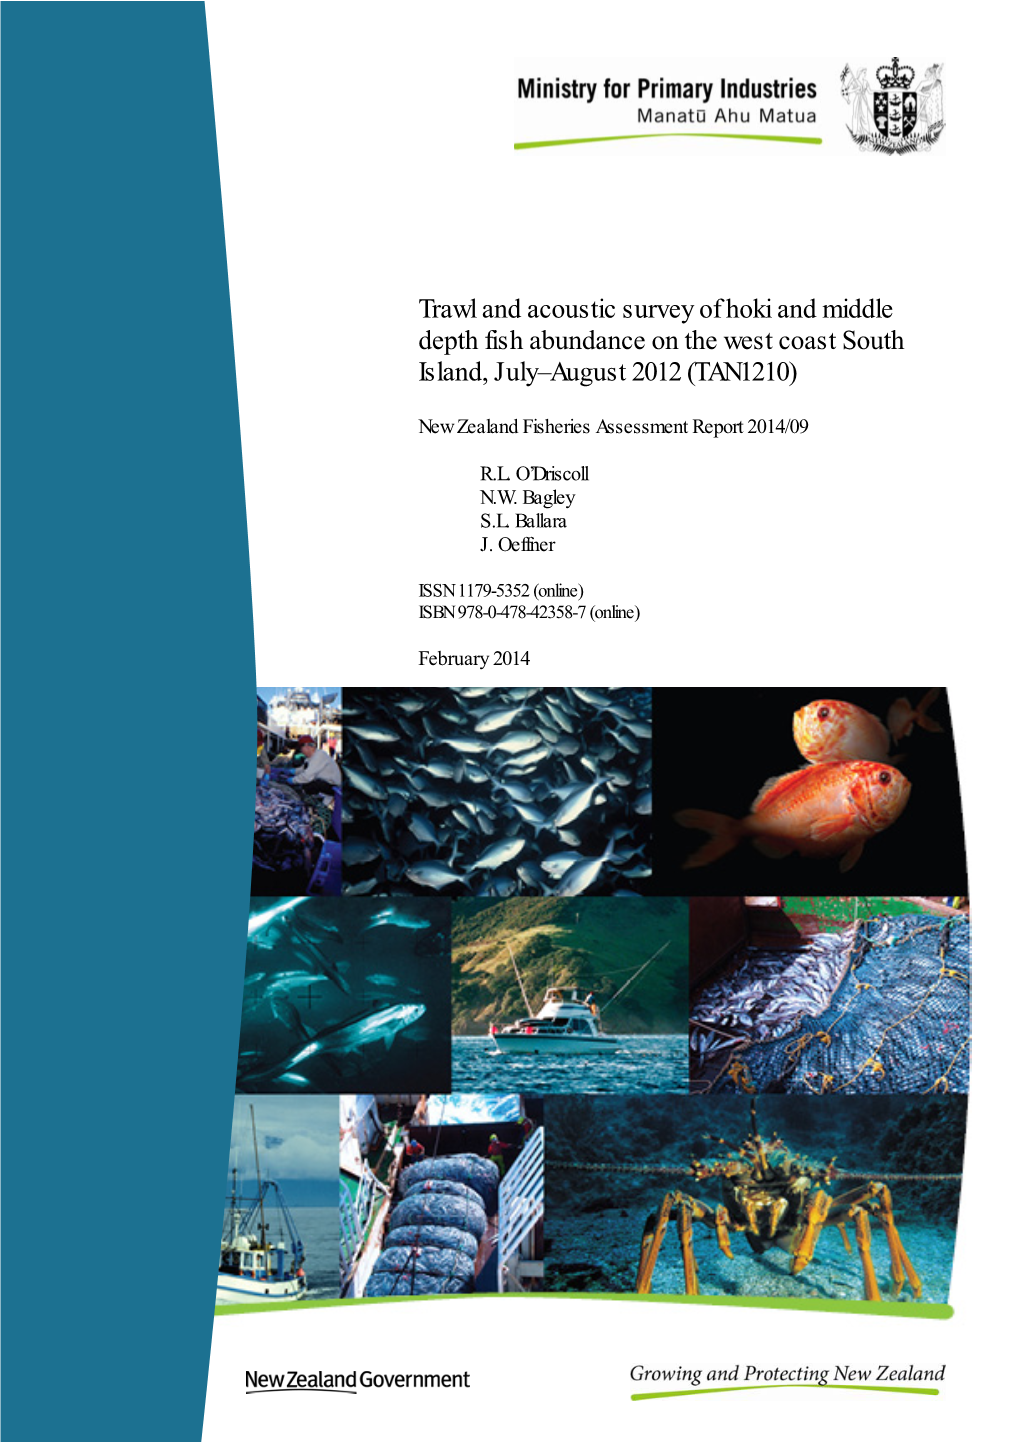 Trawl and Acoustic Survey of Hoki and Middle Depth Fish Abundance on the West Coast South Island, July–August 2012 (TAN1210)